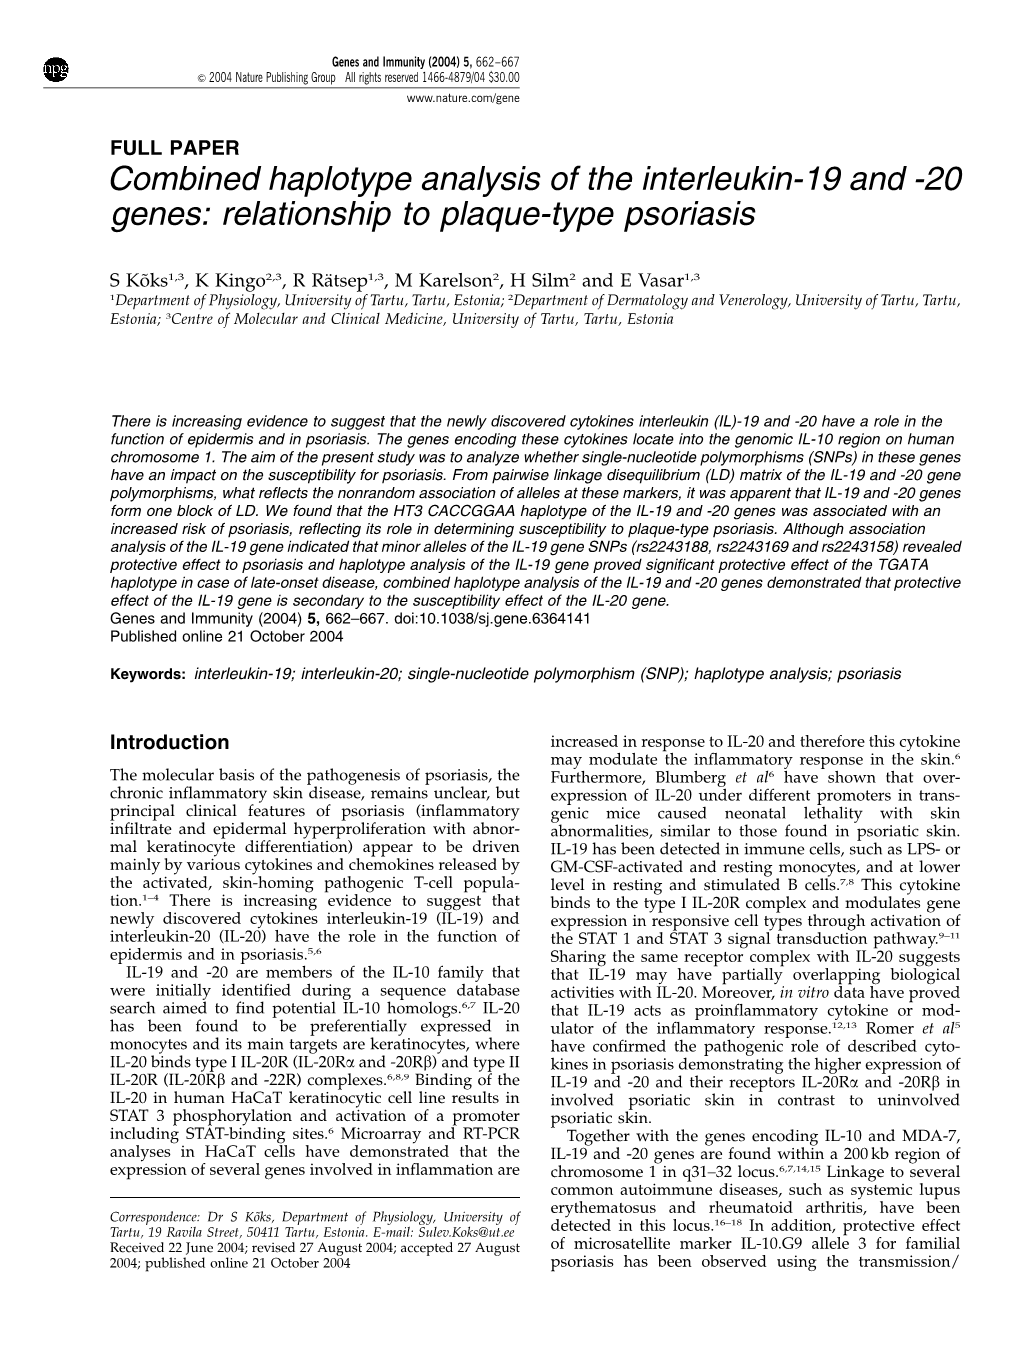 Combined Haplotype Analysis of the Interleukin-19 and -20 Genes: Relationship to Plaque-Type Psoriasis